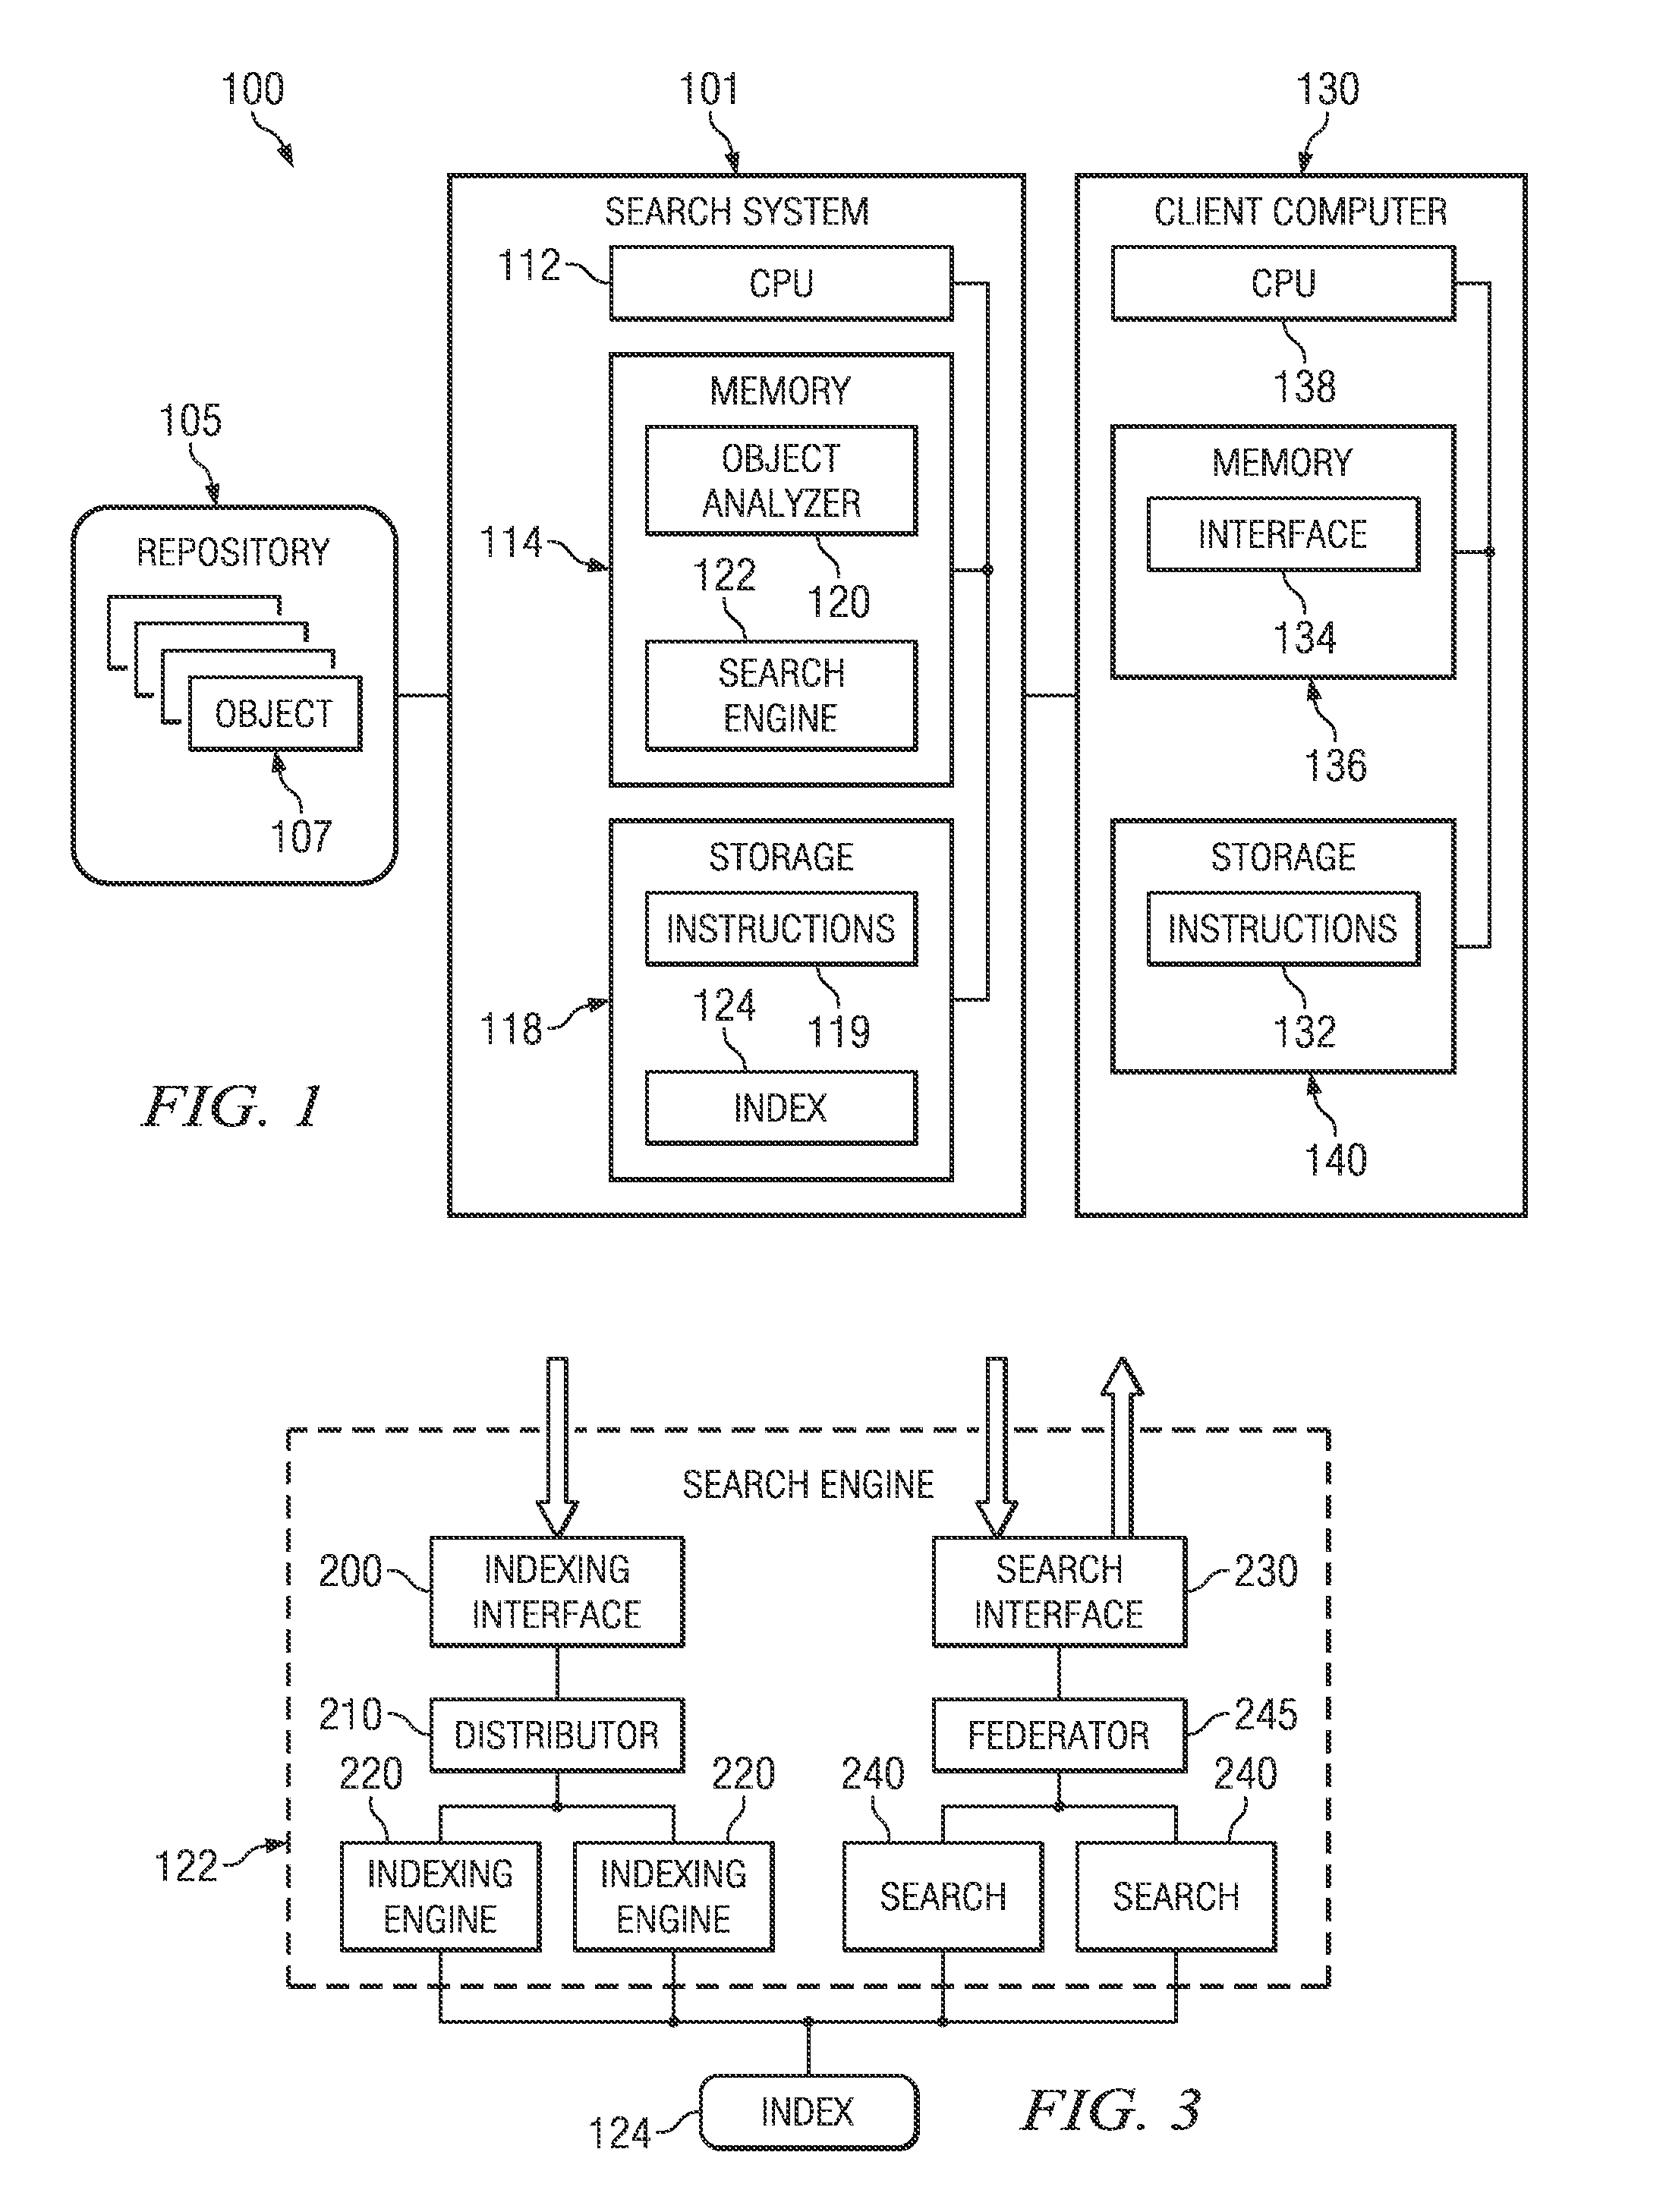 System and Method of Search Indexes Using Key-Value Attributes to Searchable Metadata